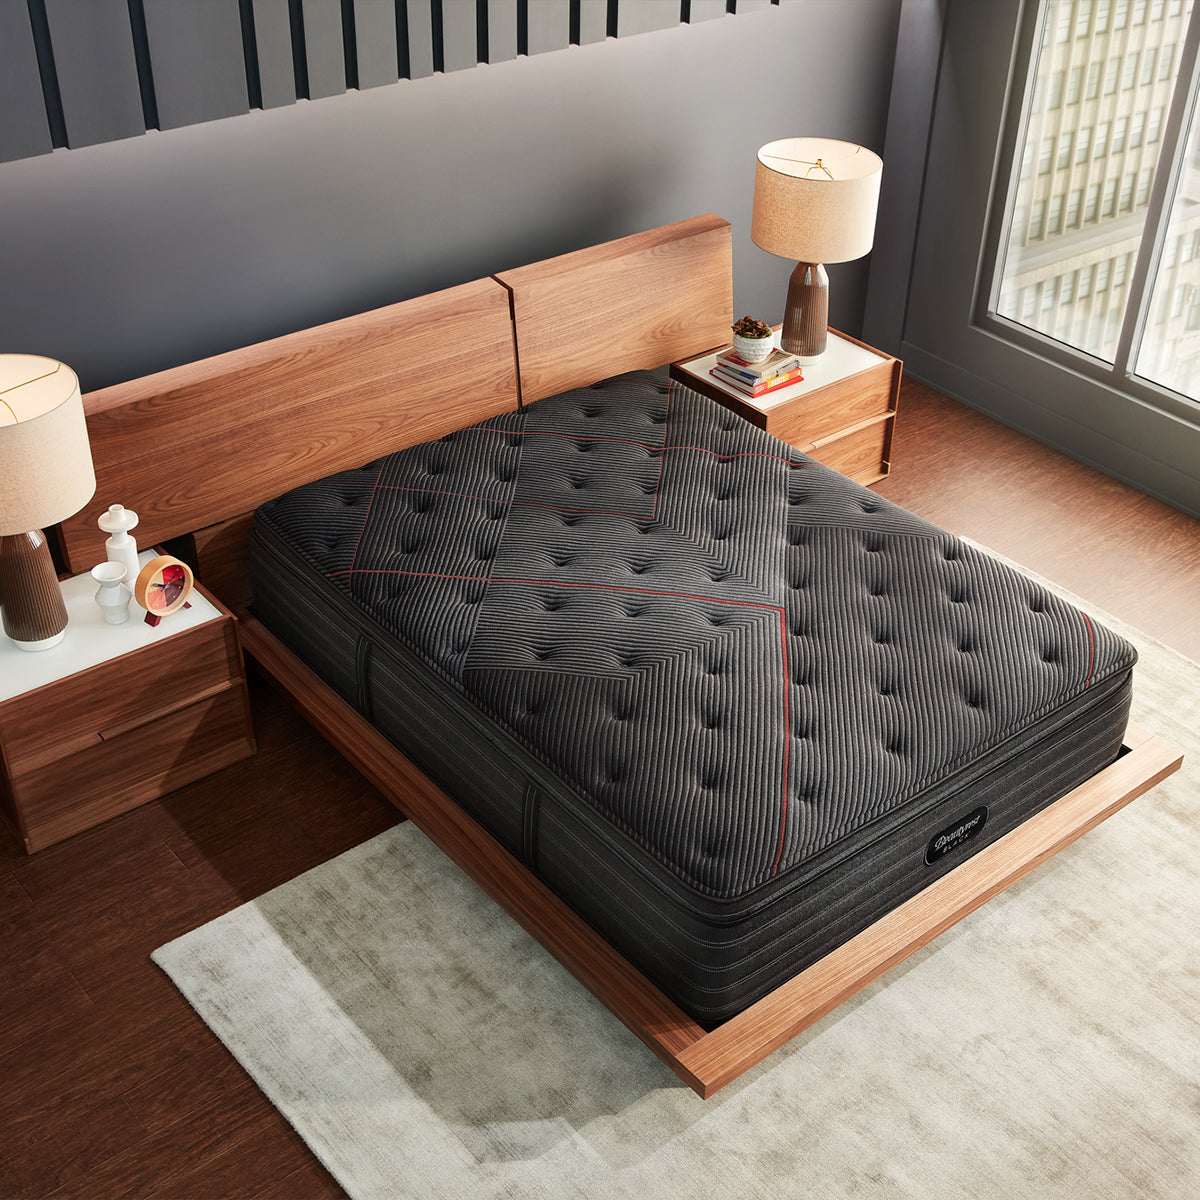 Beautyrest Black C-Class Plush Pillow Top Mattress On Bed Frame In Bedroom Overhead View